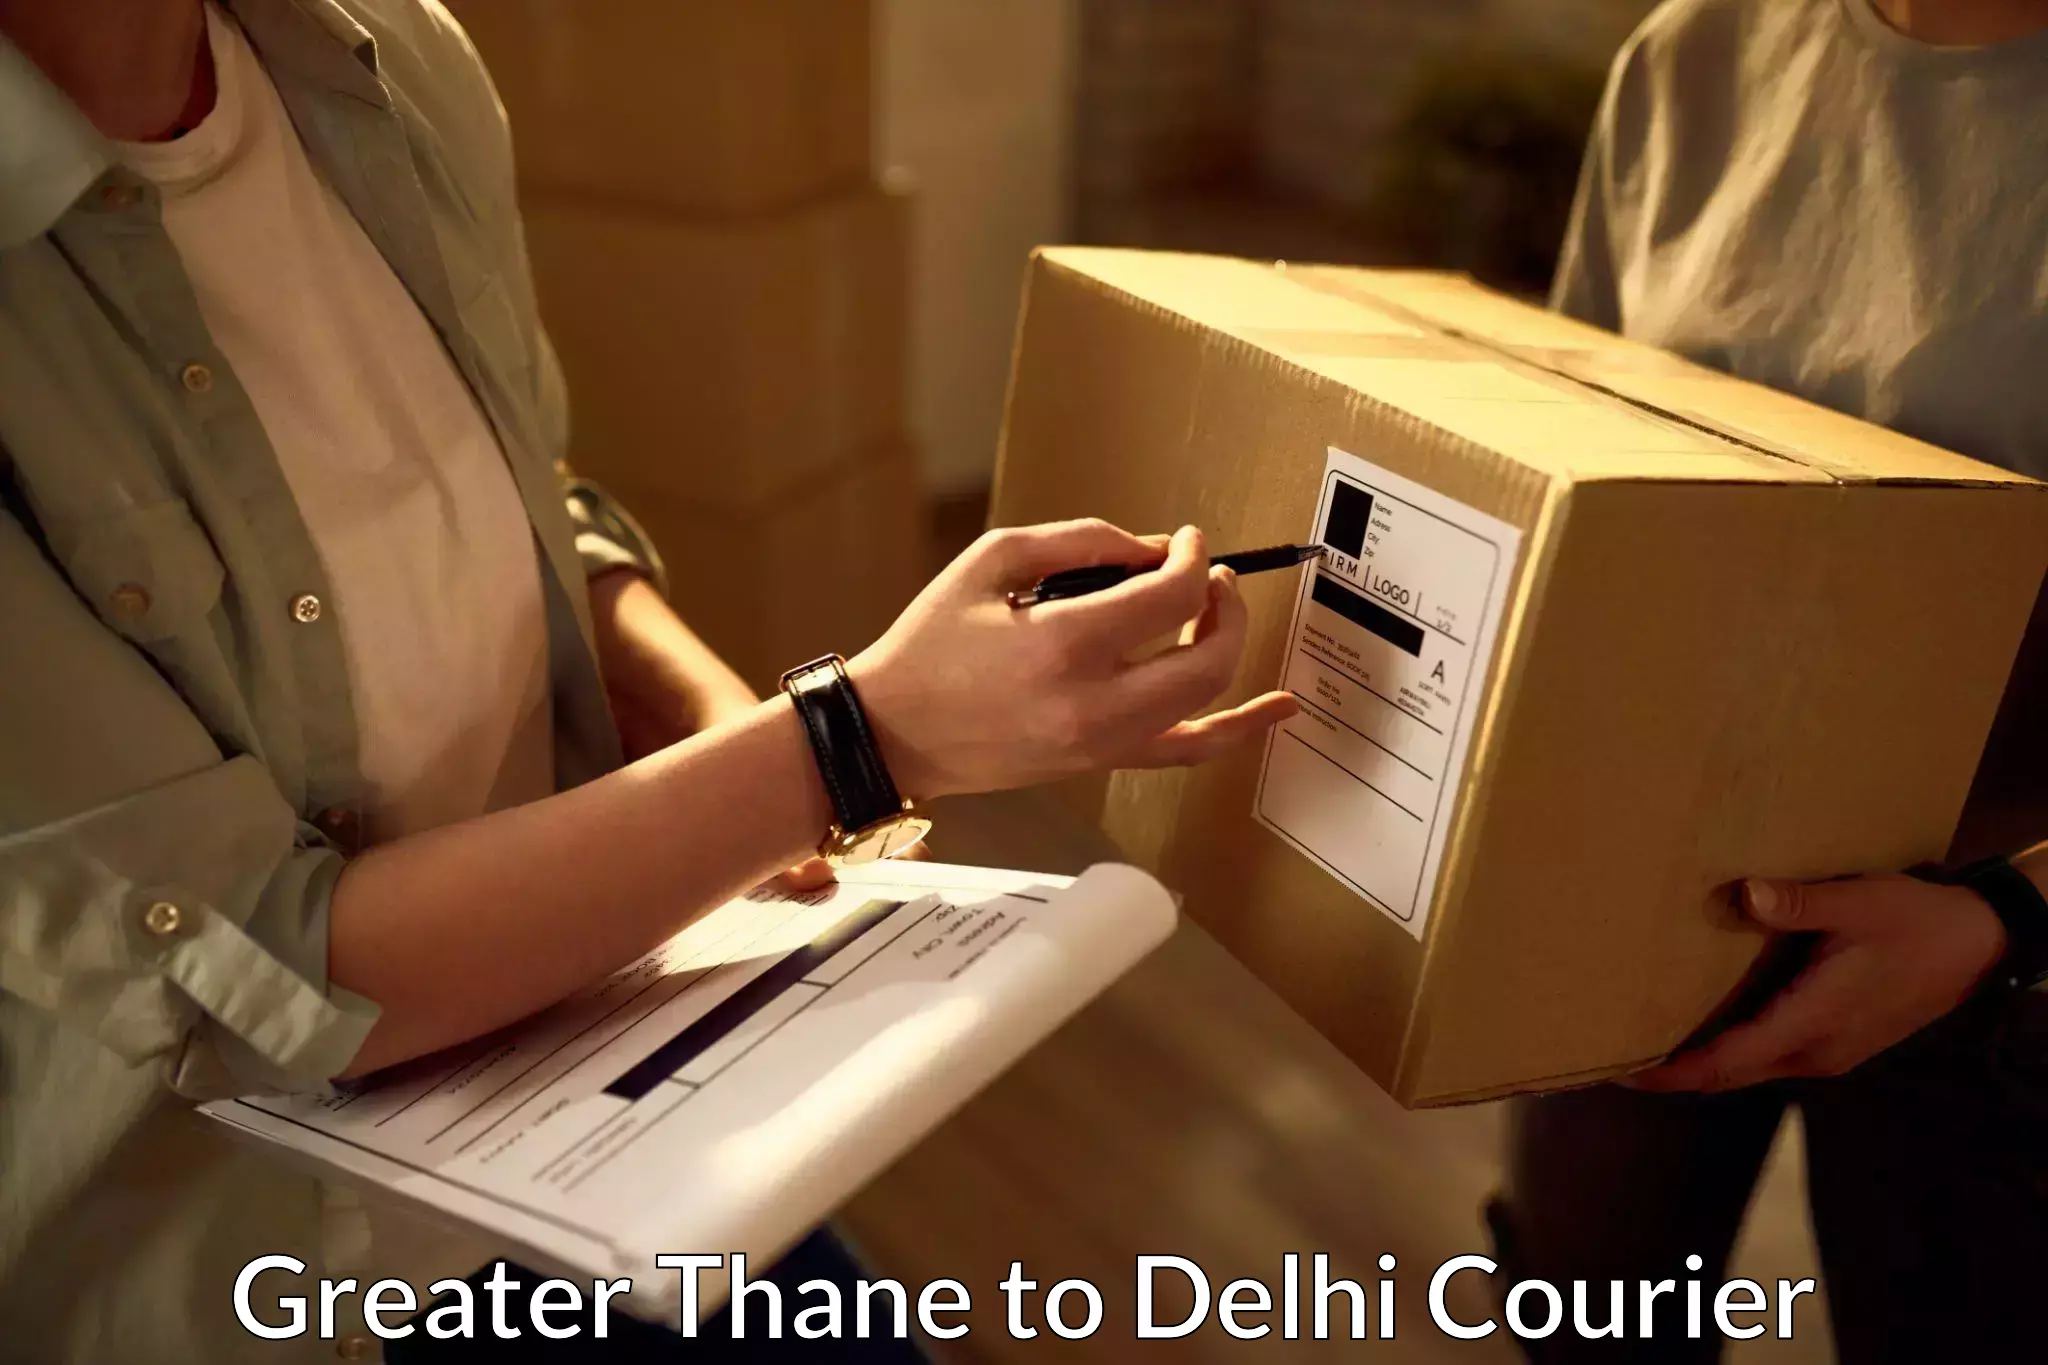 High-capacity parcel service Greater Thane to Burari